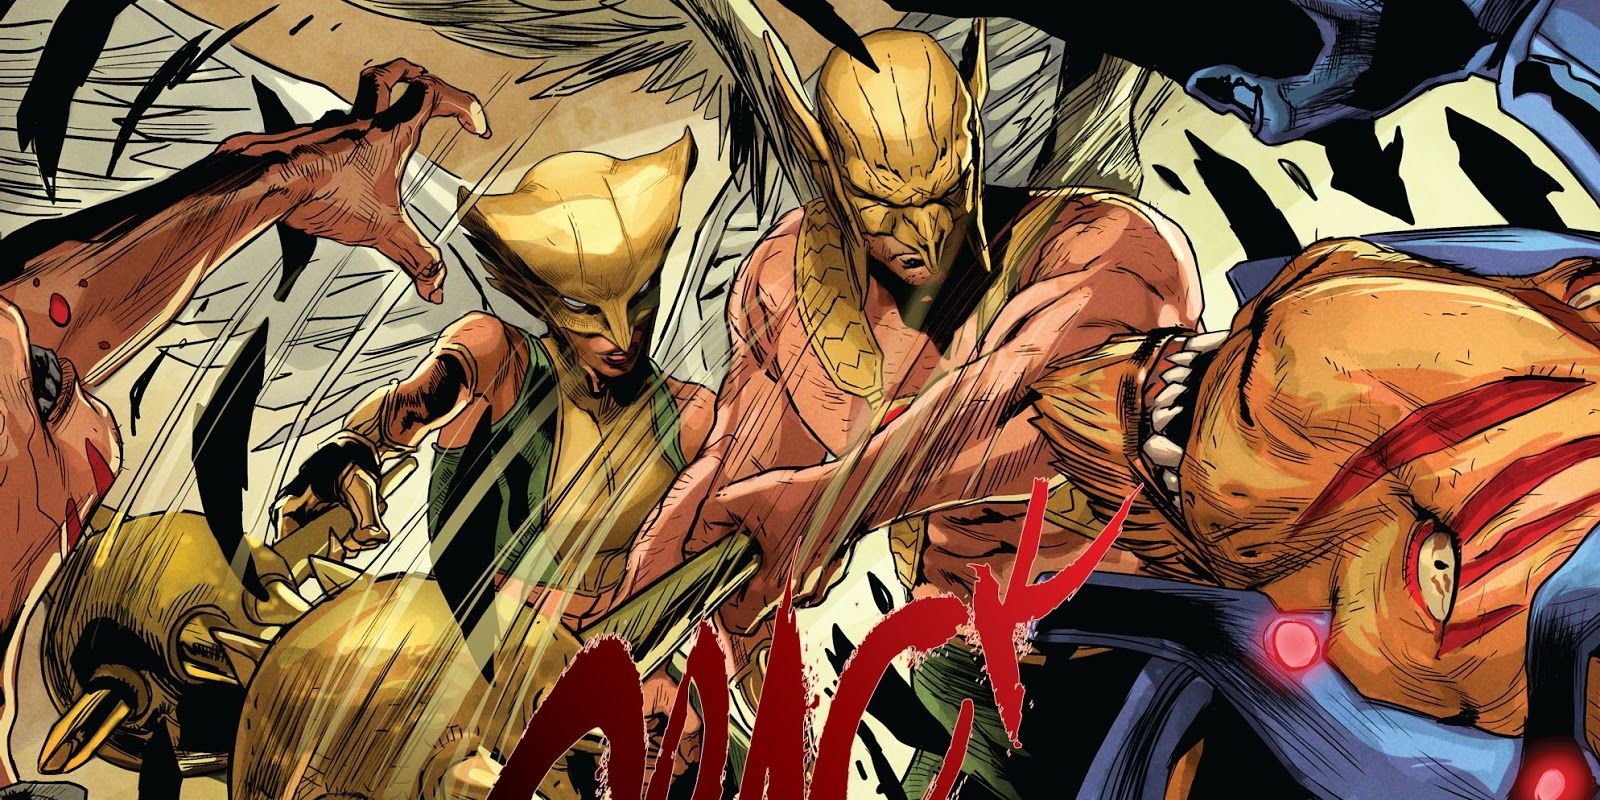 Hawkman and Hawkgirl in battle together in DC Comics.